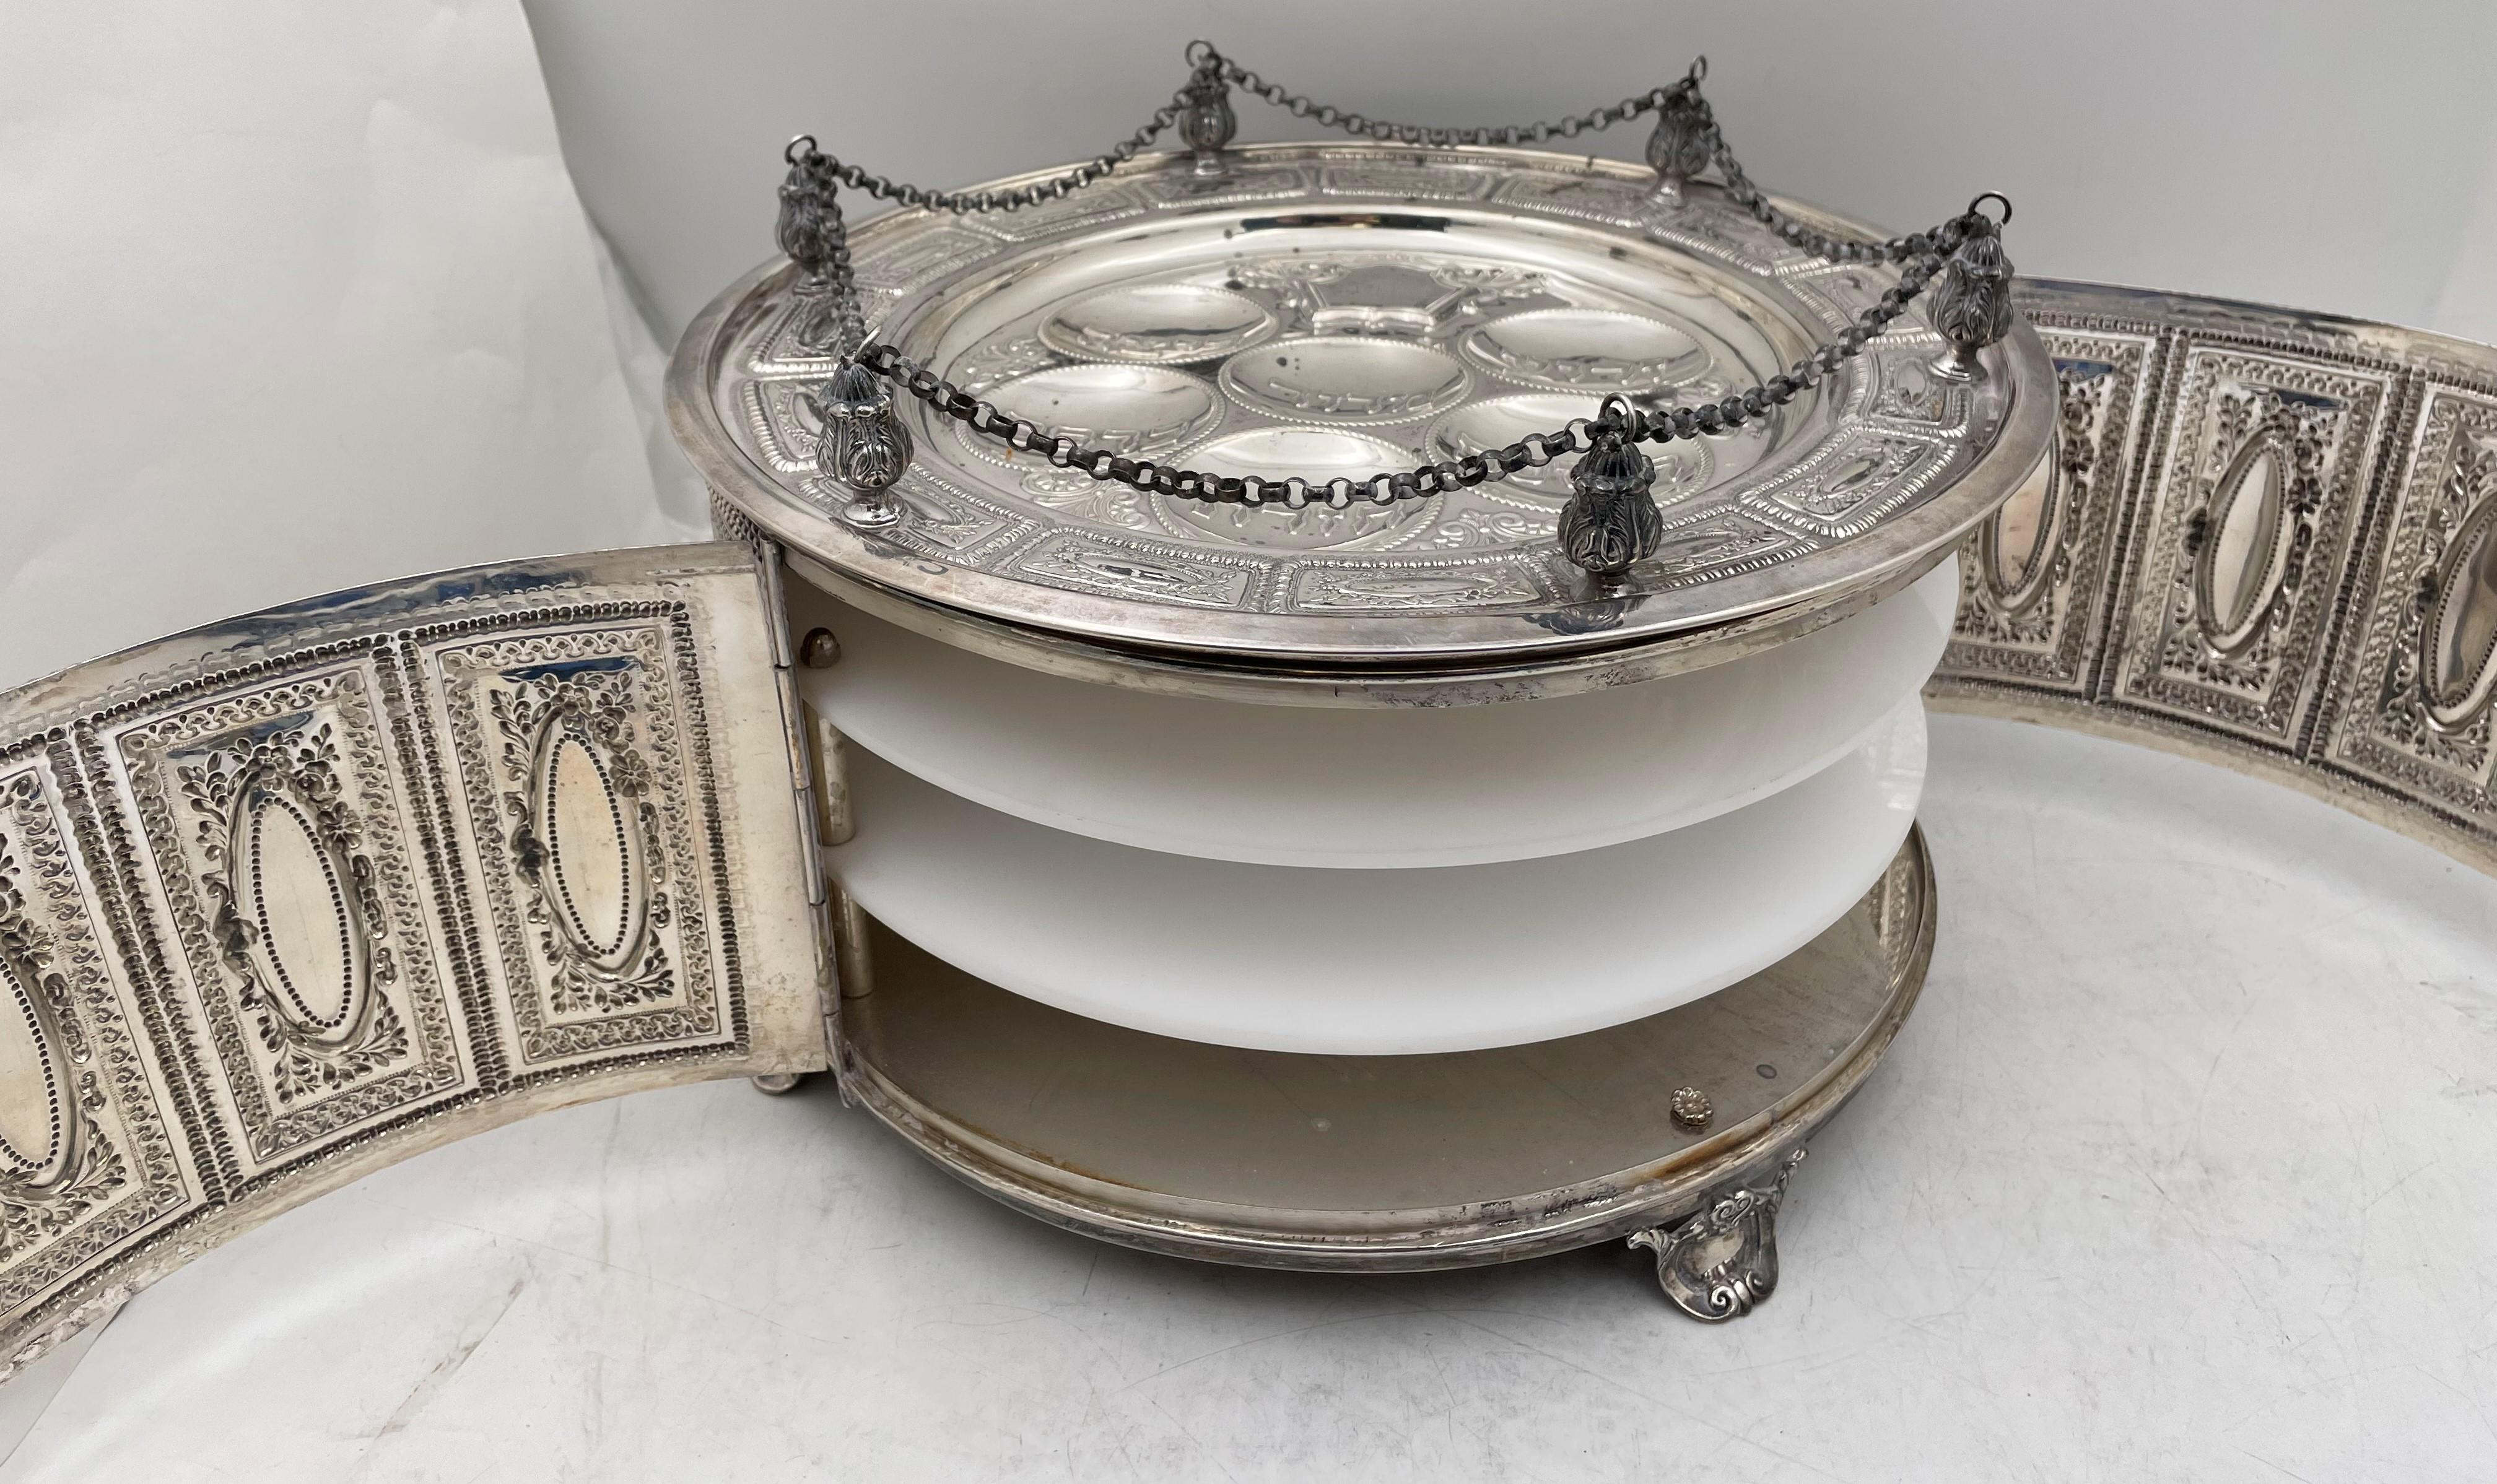 Sterling silver passover seder plate and matza cover with a beautiful, ornate design. There are 3, built-in, lucite trays. 

This exceptional piece, which would be a great addition to a Passover seder table, measures 13 1/2'' in diameter by 8